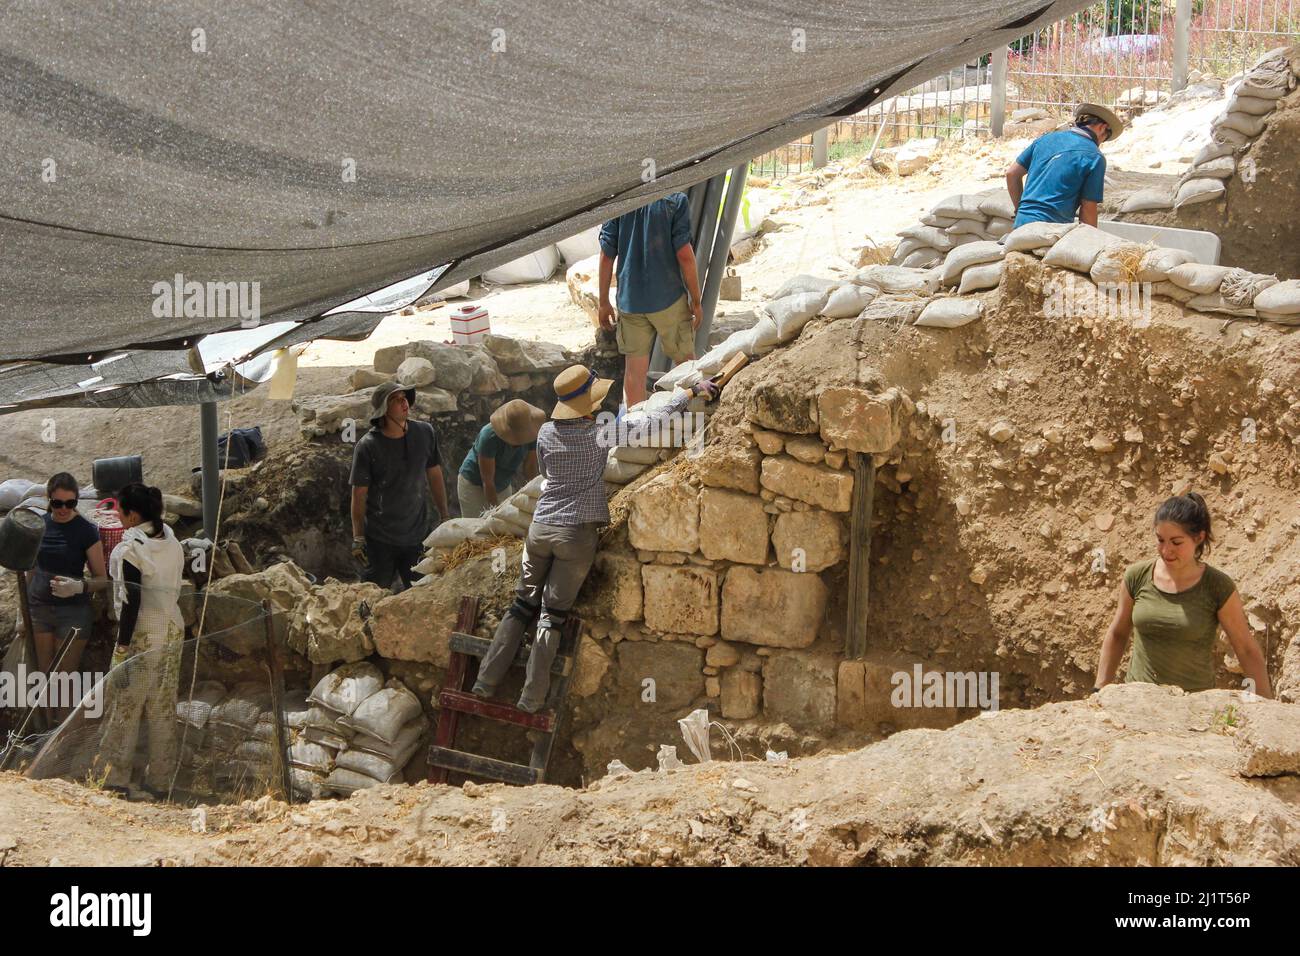 Students from the University of North Carolina at Charlotte conduct an archaeological dig on Mount Zion in Jerusalem, Israel Stock Photo